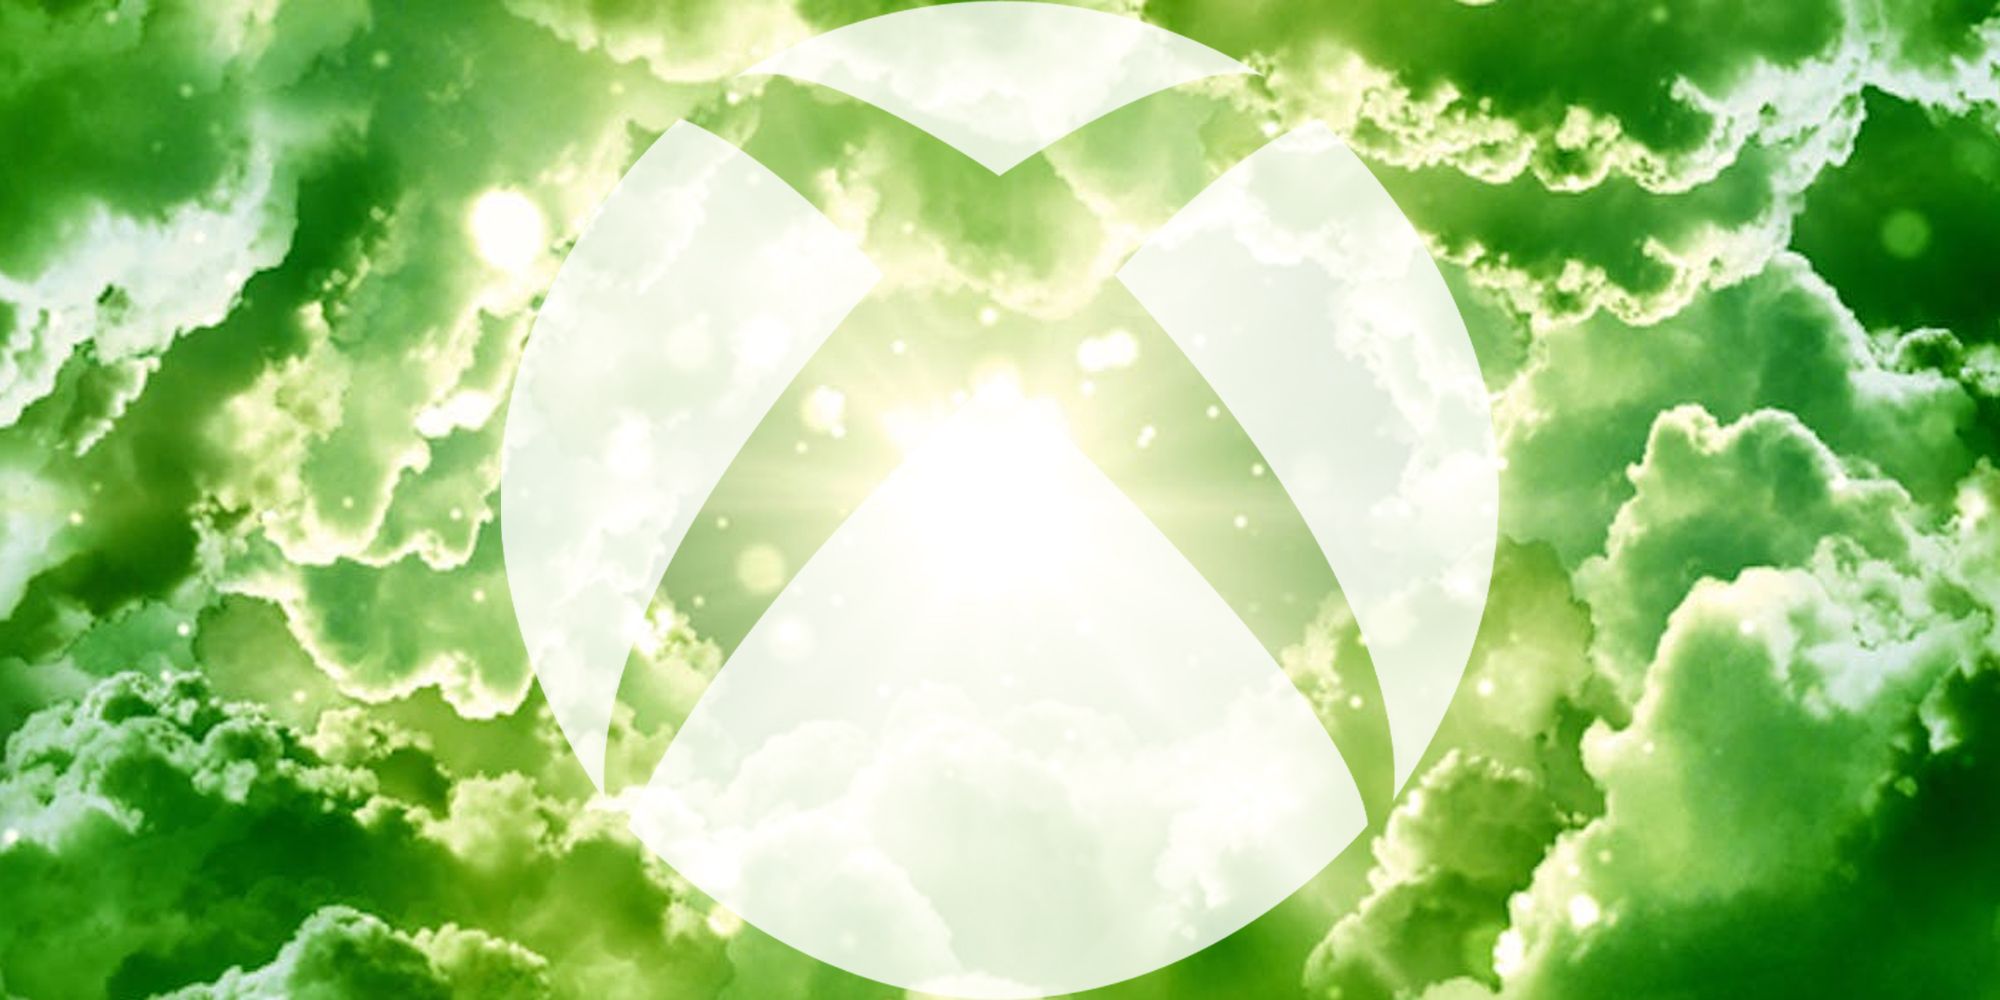 Xbox Is Removing One Major Feature May 30, So You Should Prepare